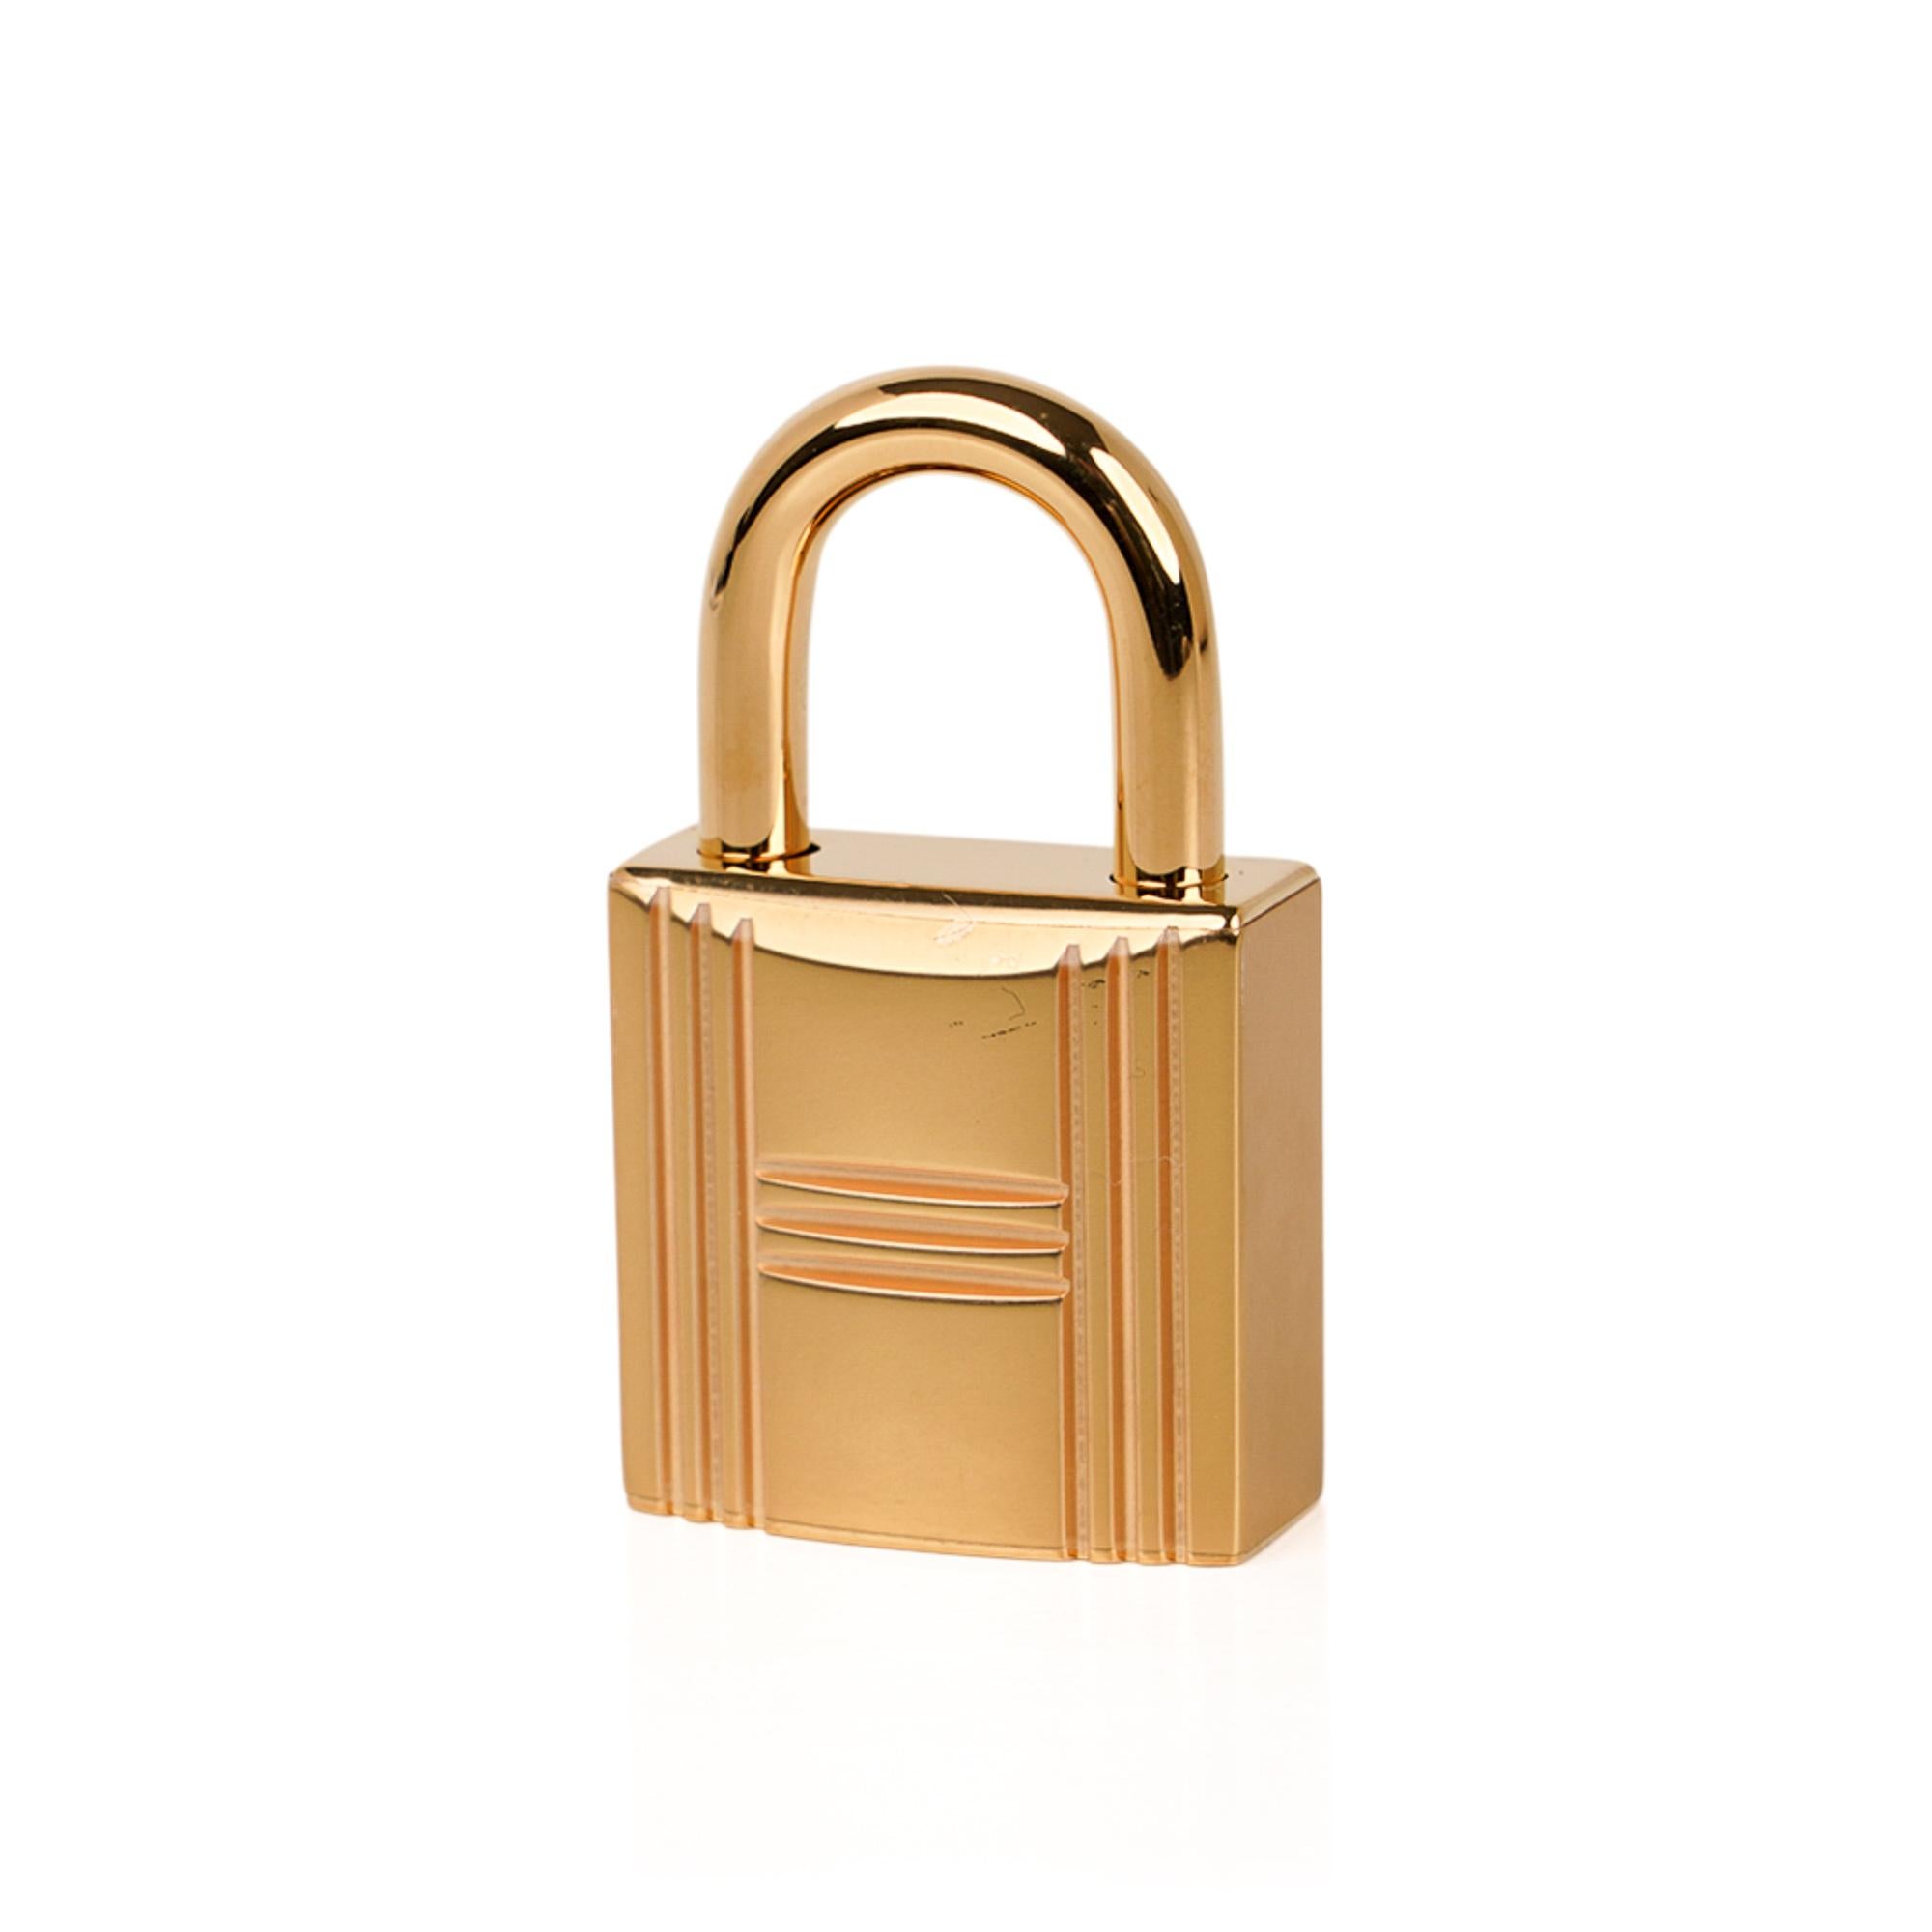 Mightychic offers a guaranteed authentic Hermes Picotin Lock 18 tote bag featured in coveted Craie.
Ultimate neutral colour.
This charming Hermes Picotin tote is a perfect everyday go to bag.
Clemence leather with Gold hardware.
Comes with lock and